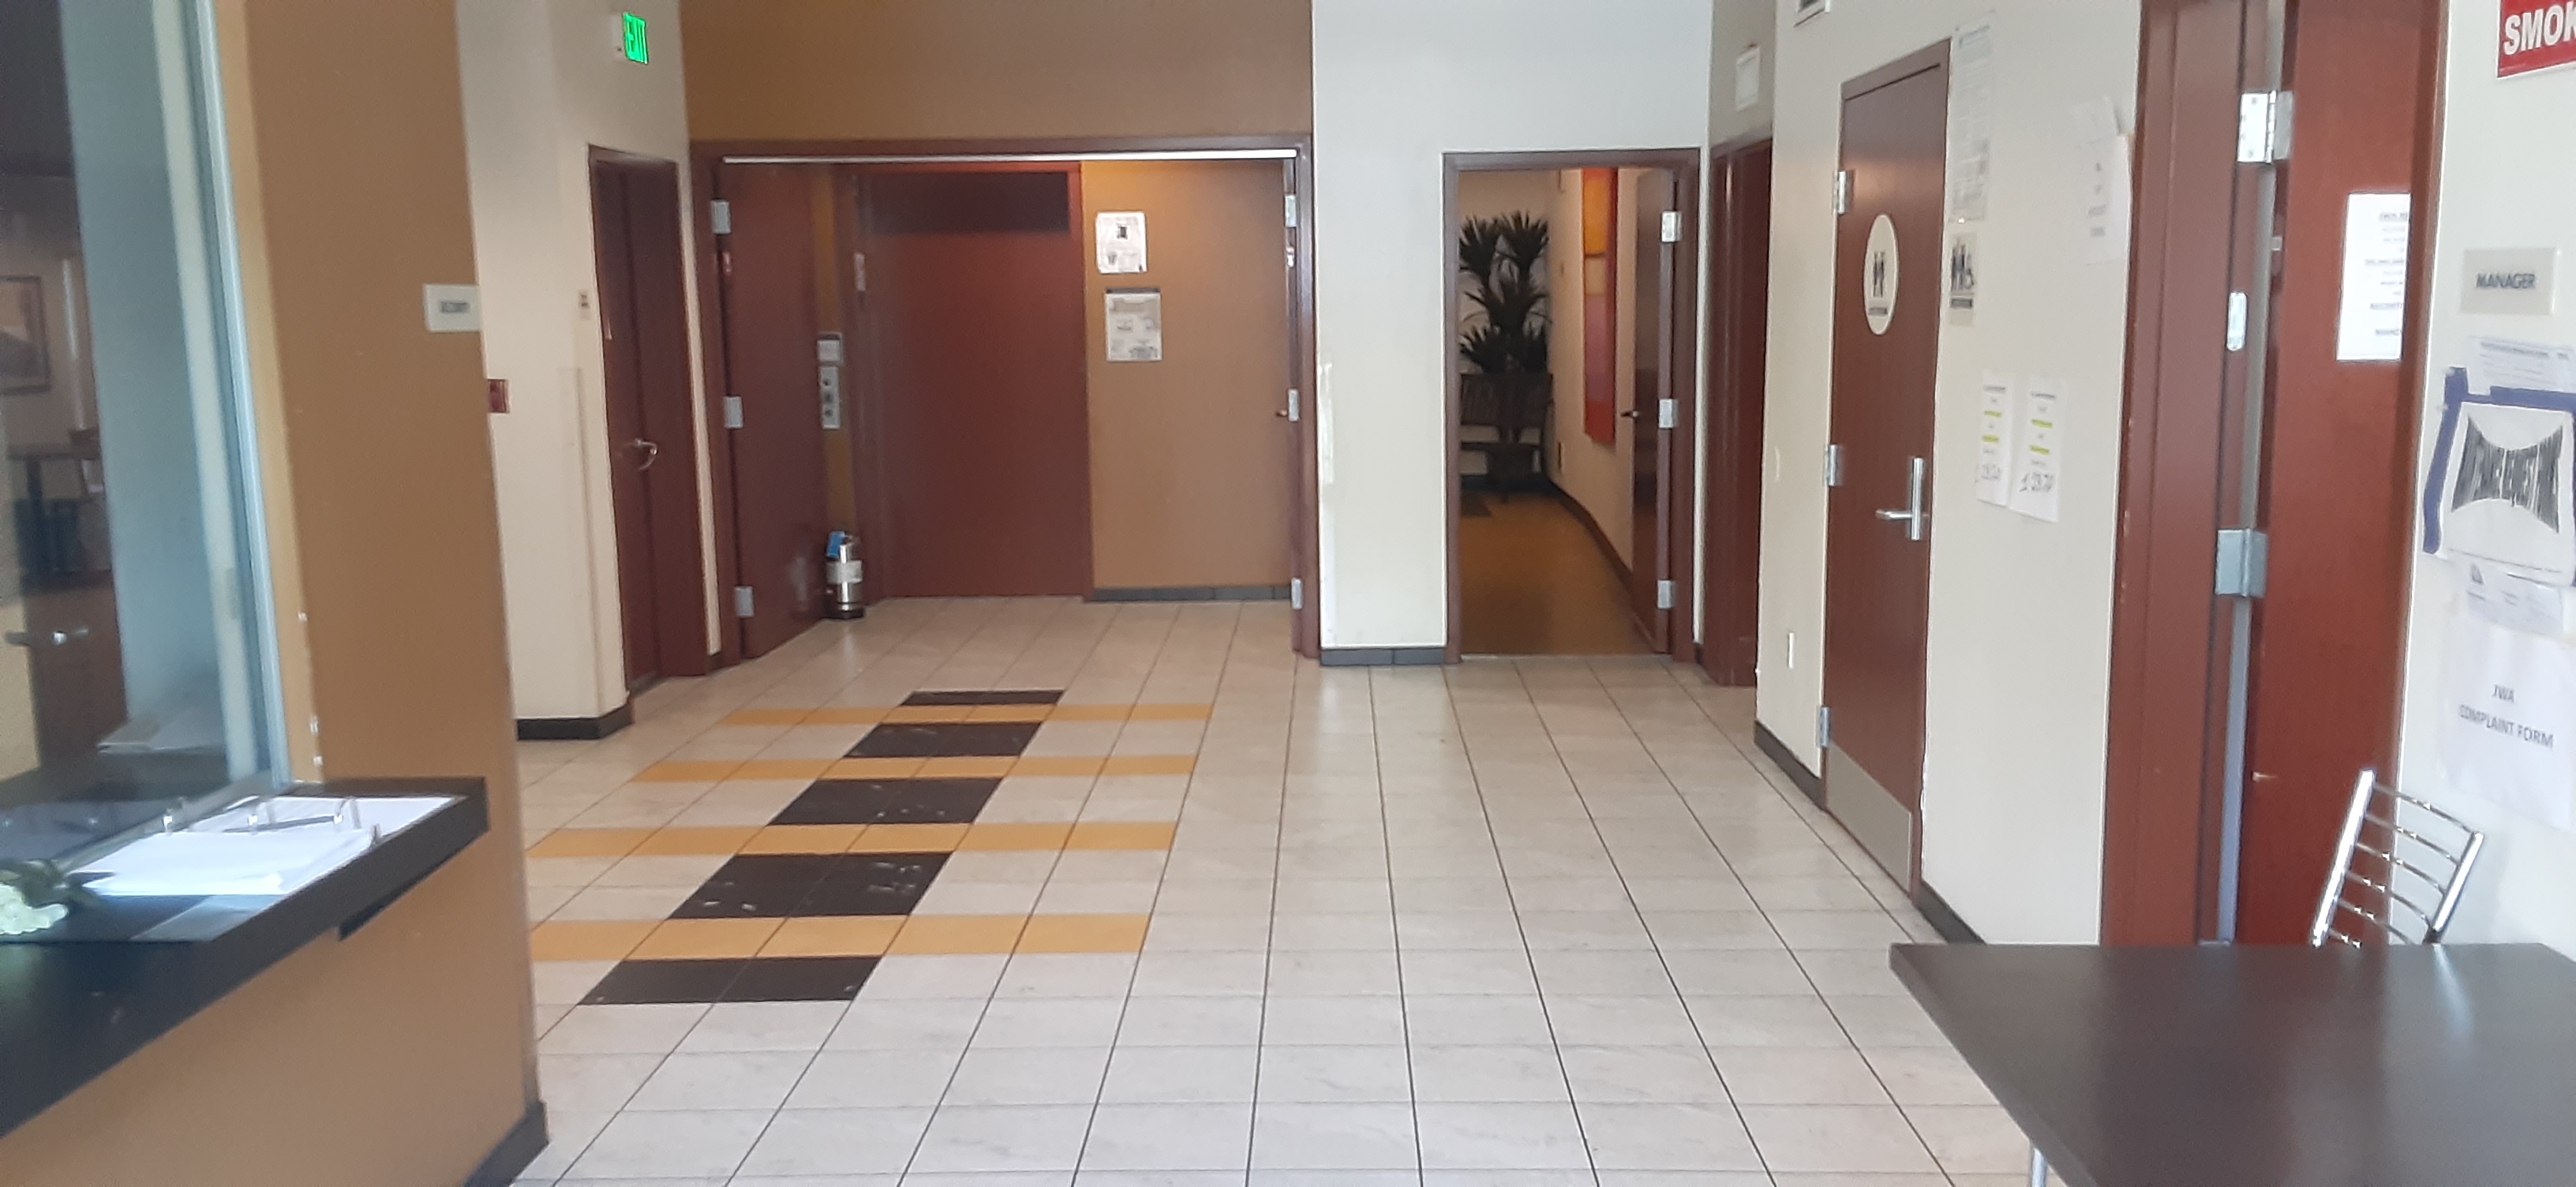 James wood lobby area. lobby area gives access to restroom, receptionist desk, and elevator,